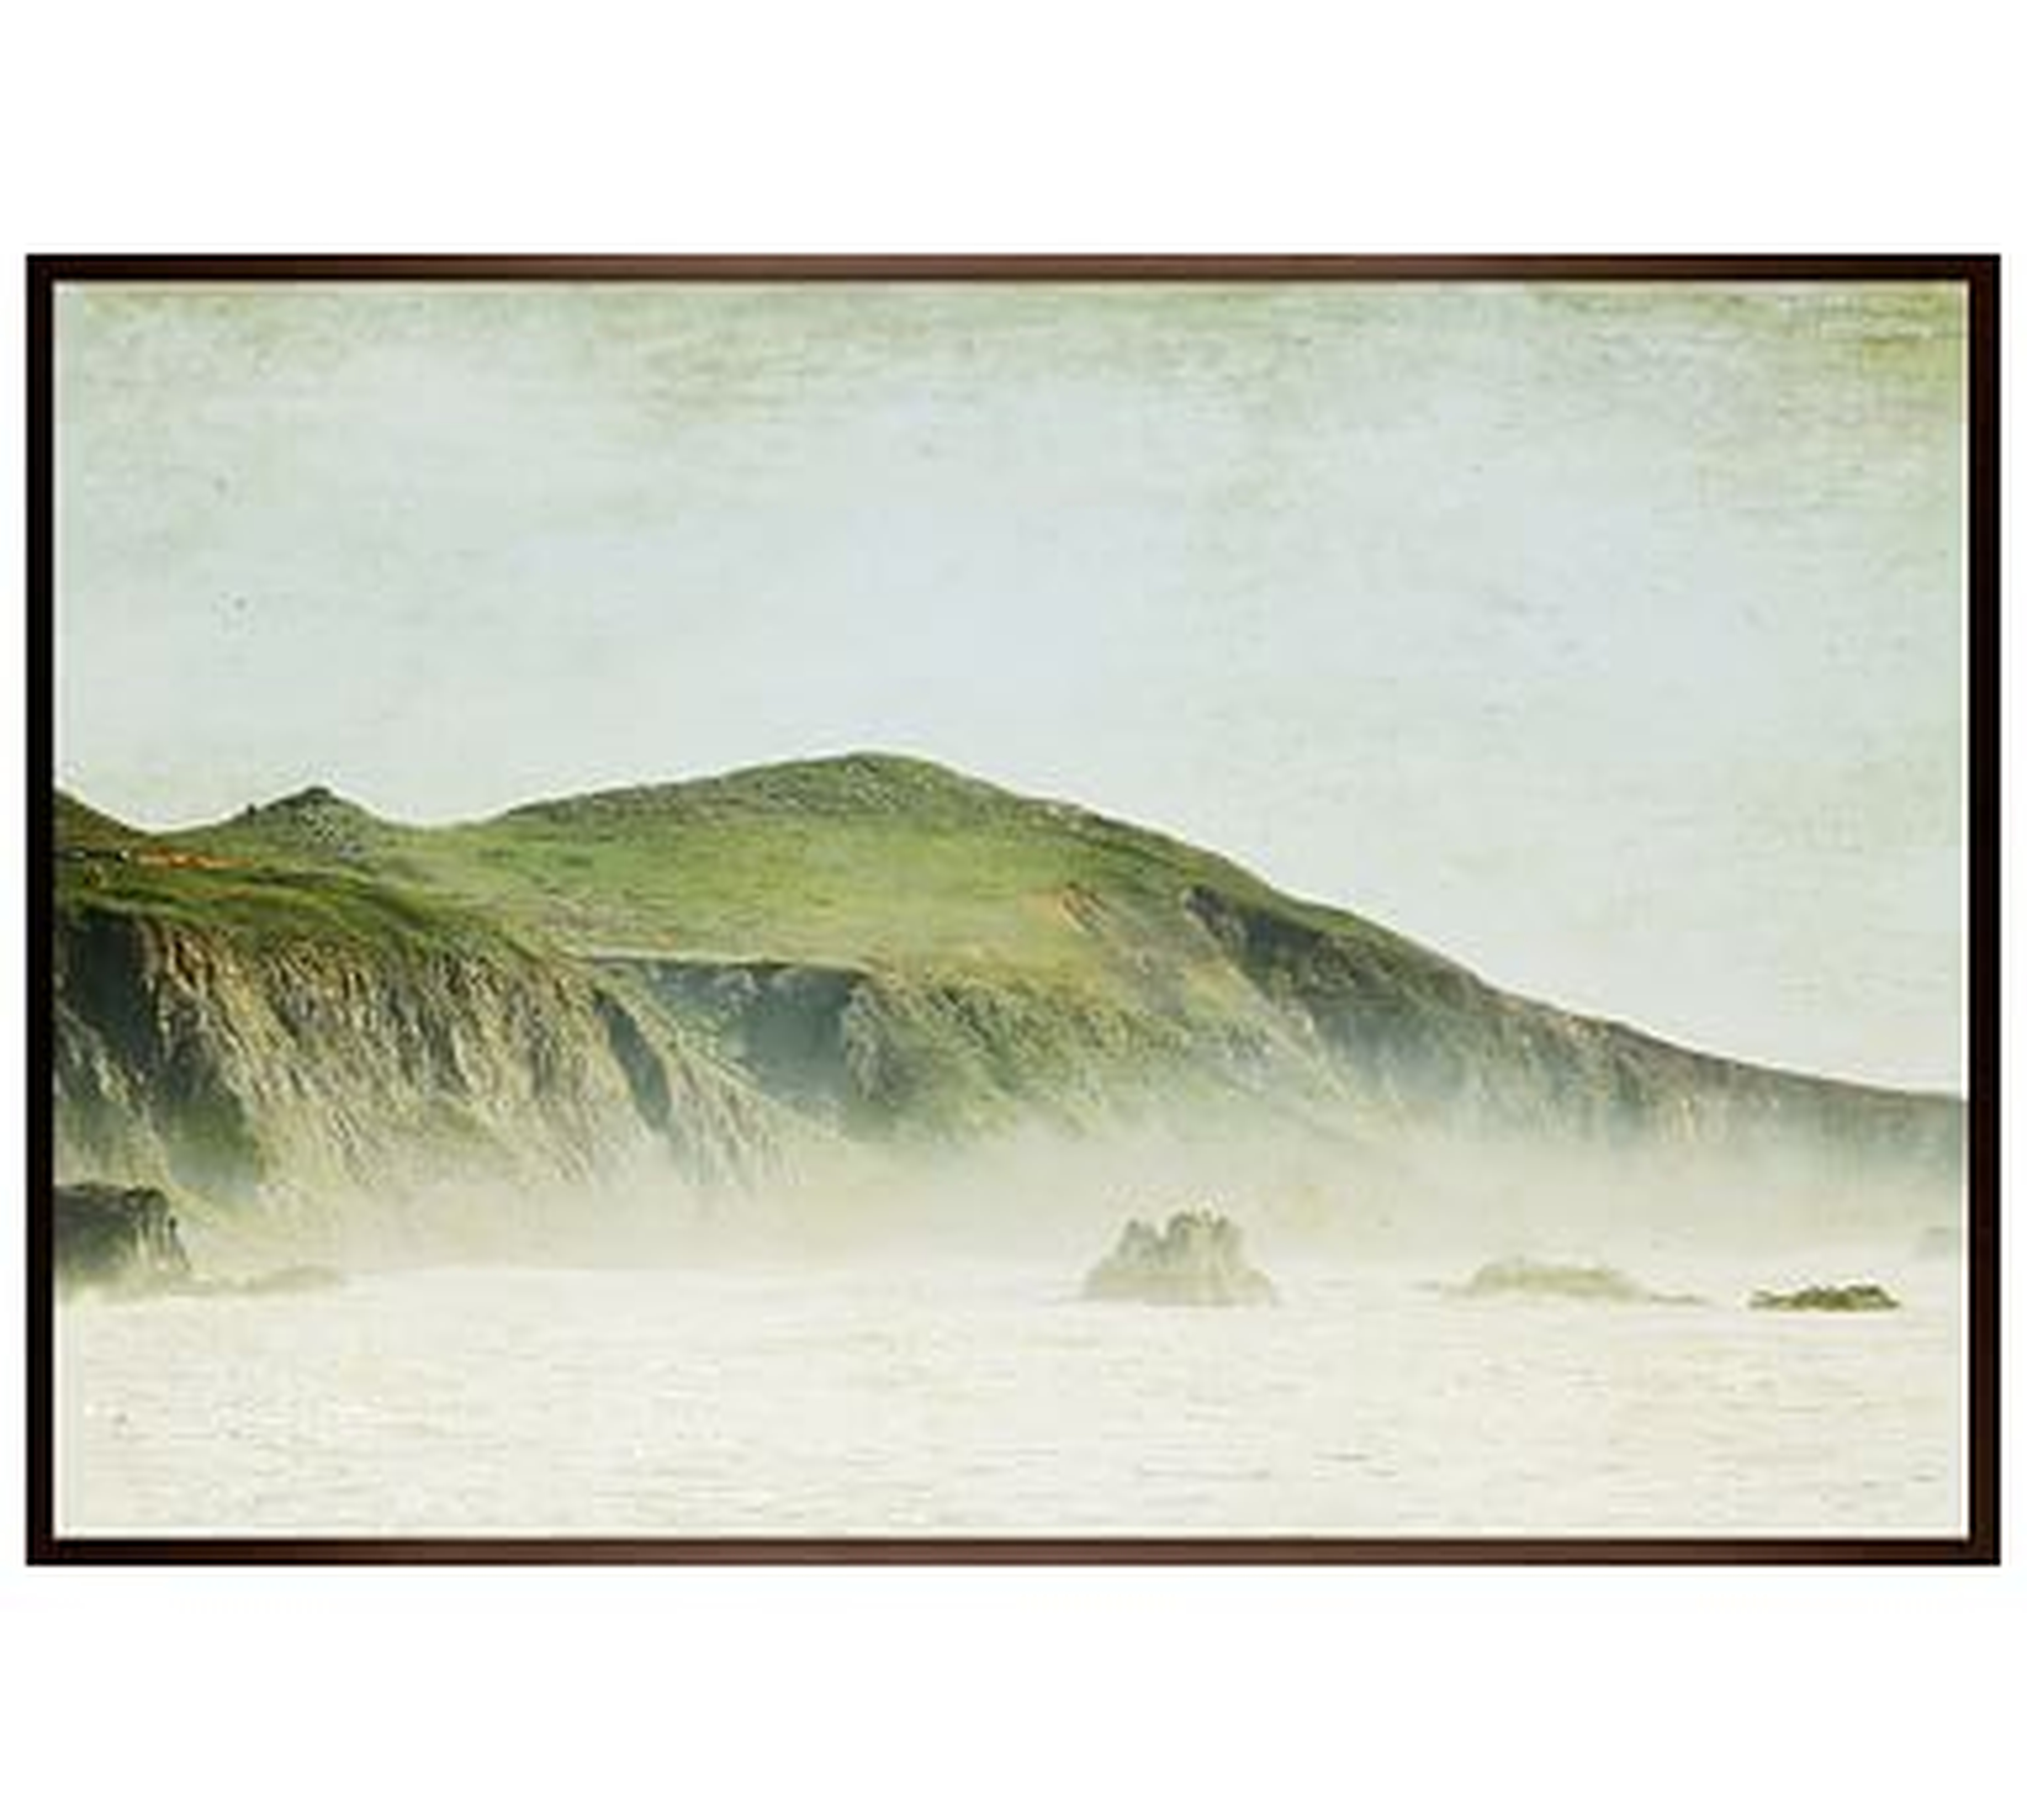 Green and Mist Framed Print by Lupen Grainne, 42 x 28", Wood Gallery Frame, Espresso, No Mat - Pottery Barn